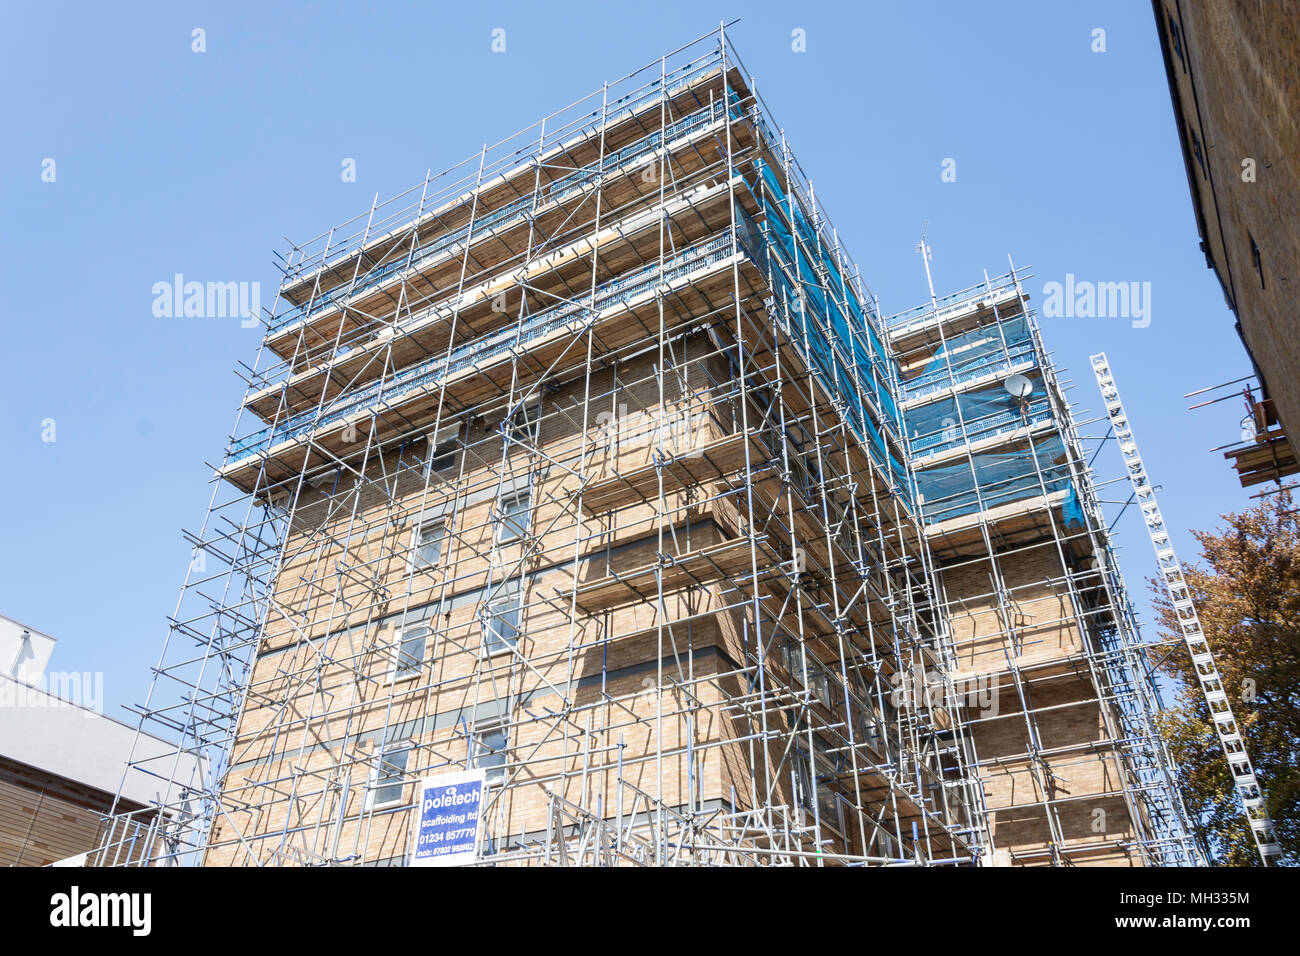 Building covered in scaffolding, Chiswick High Street, Chiswick, London Borough of Hounslow, Greater London, England, United Kingdom Stock Photo